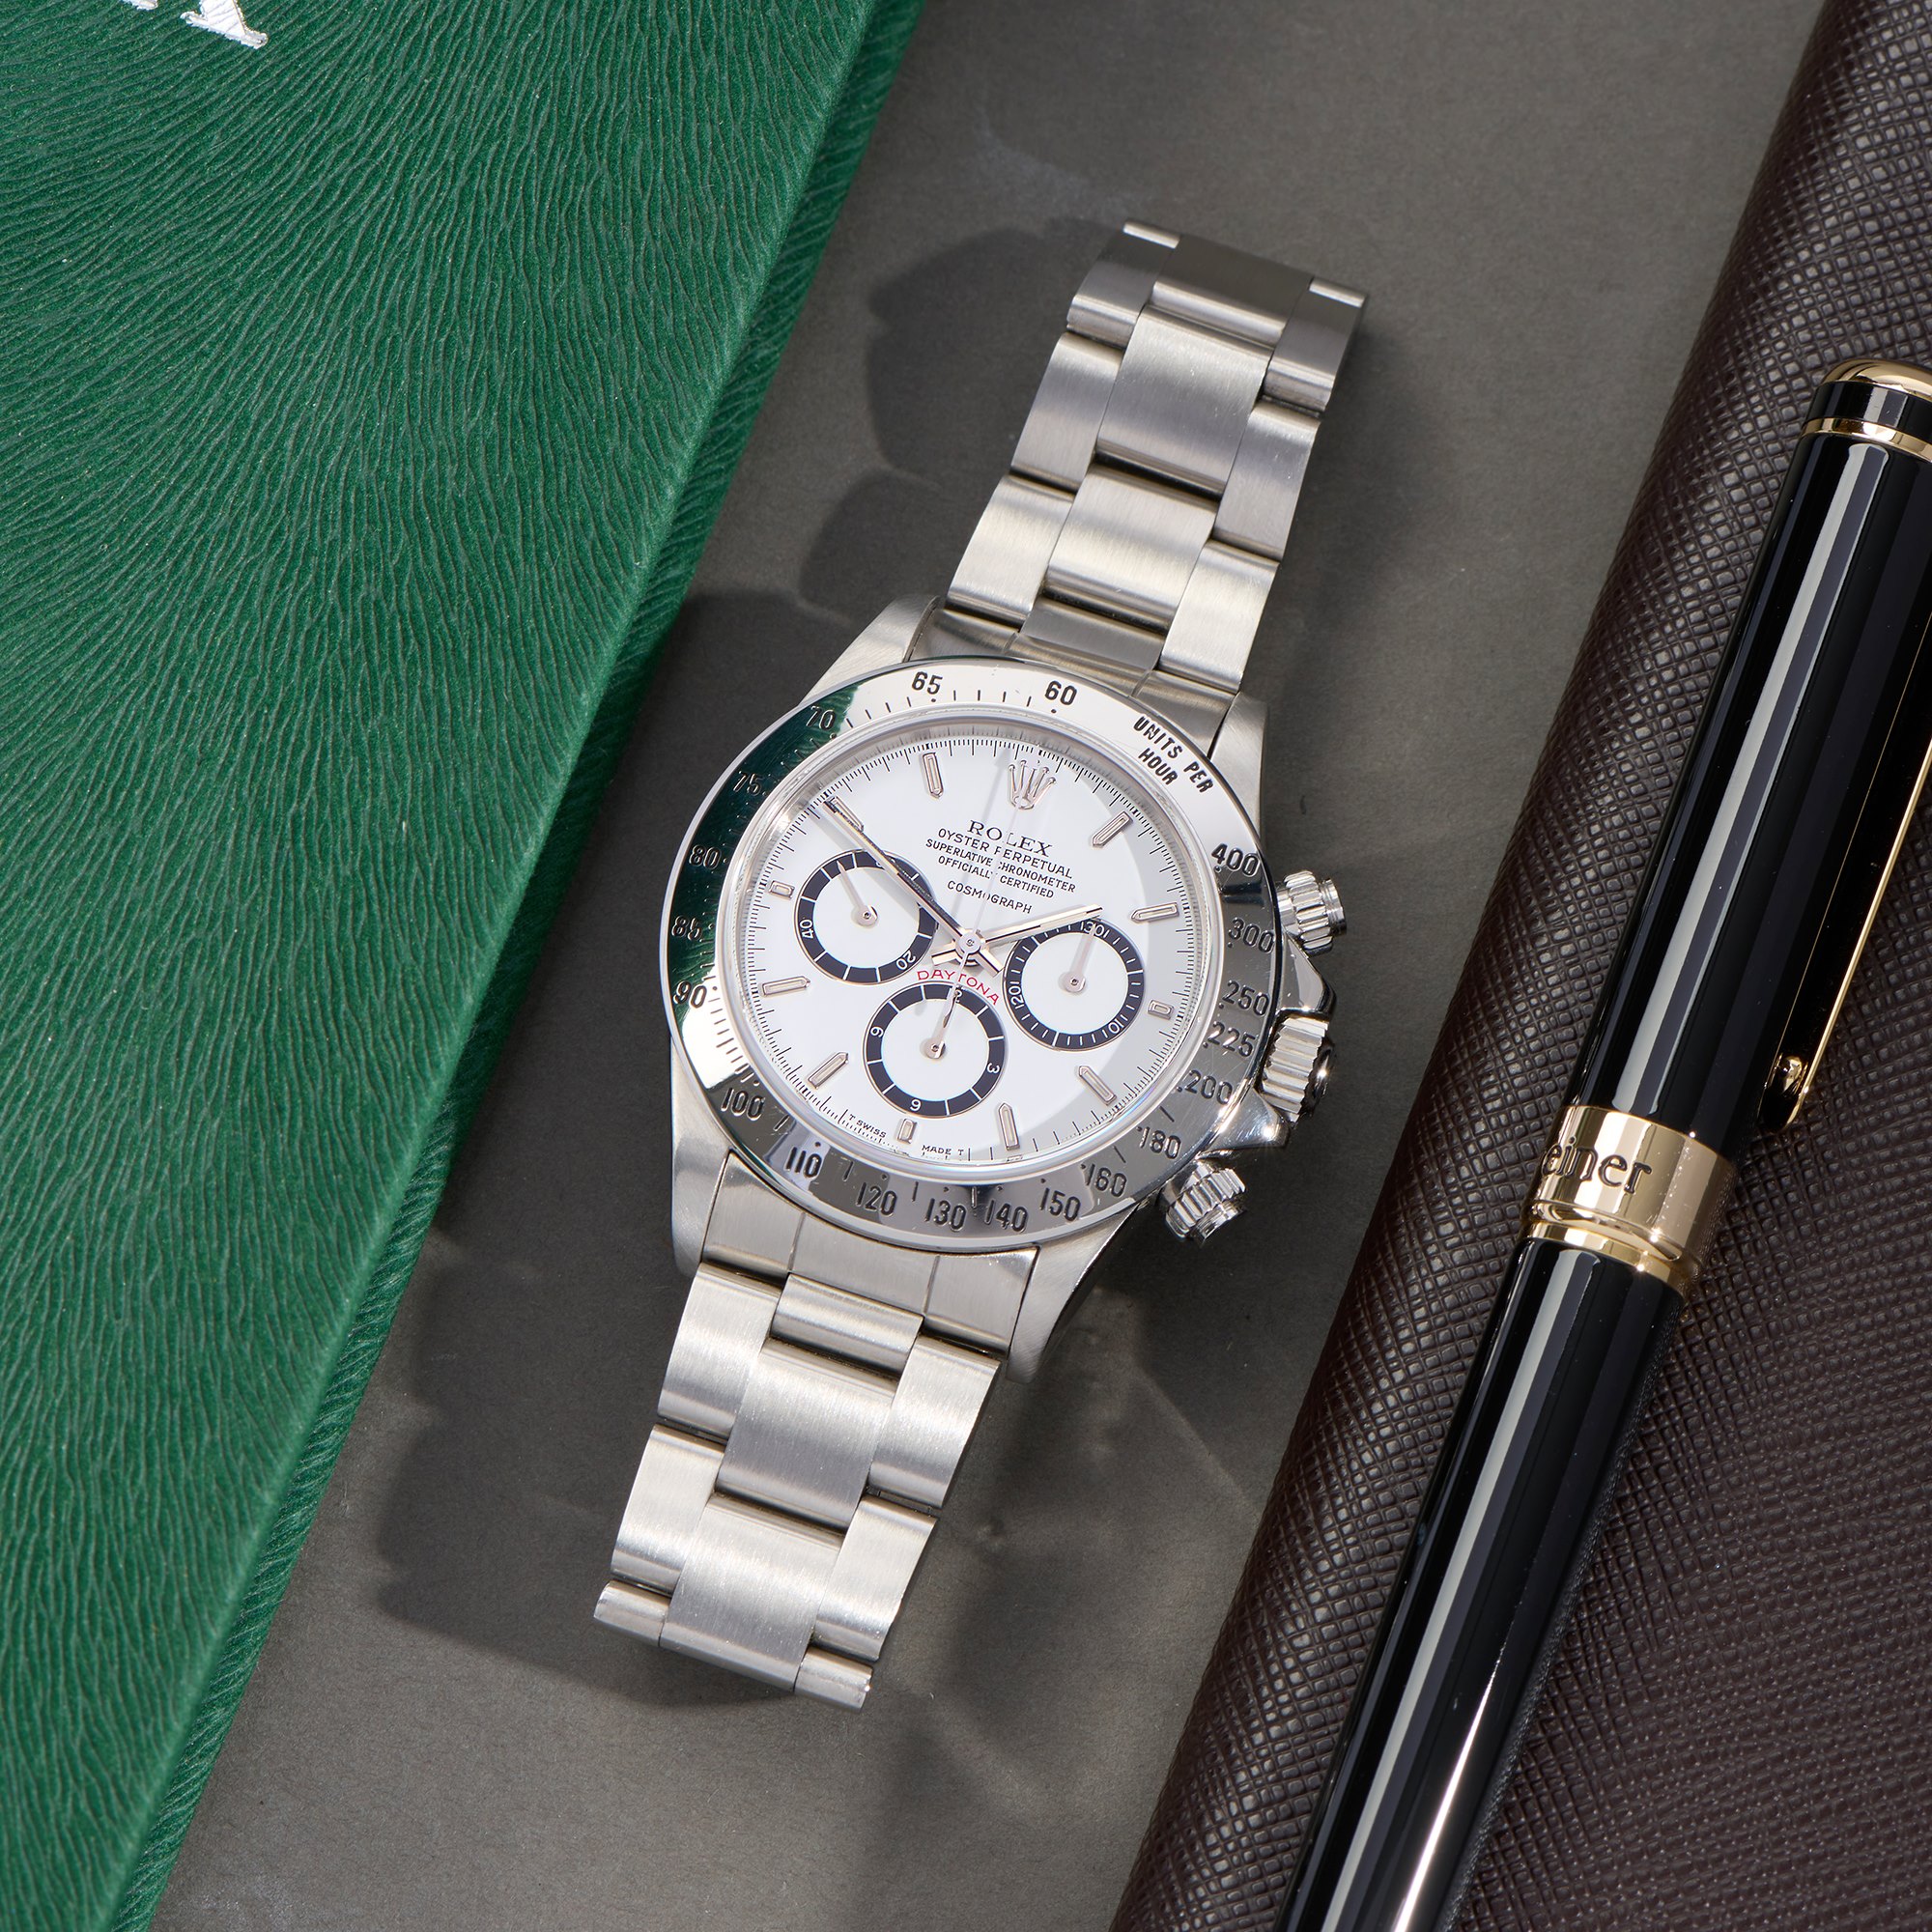 Rolex Daytona Floating Cosmograph, Inverted 6 Stainless Steel 16520